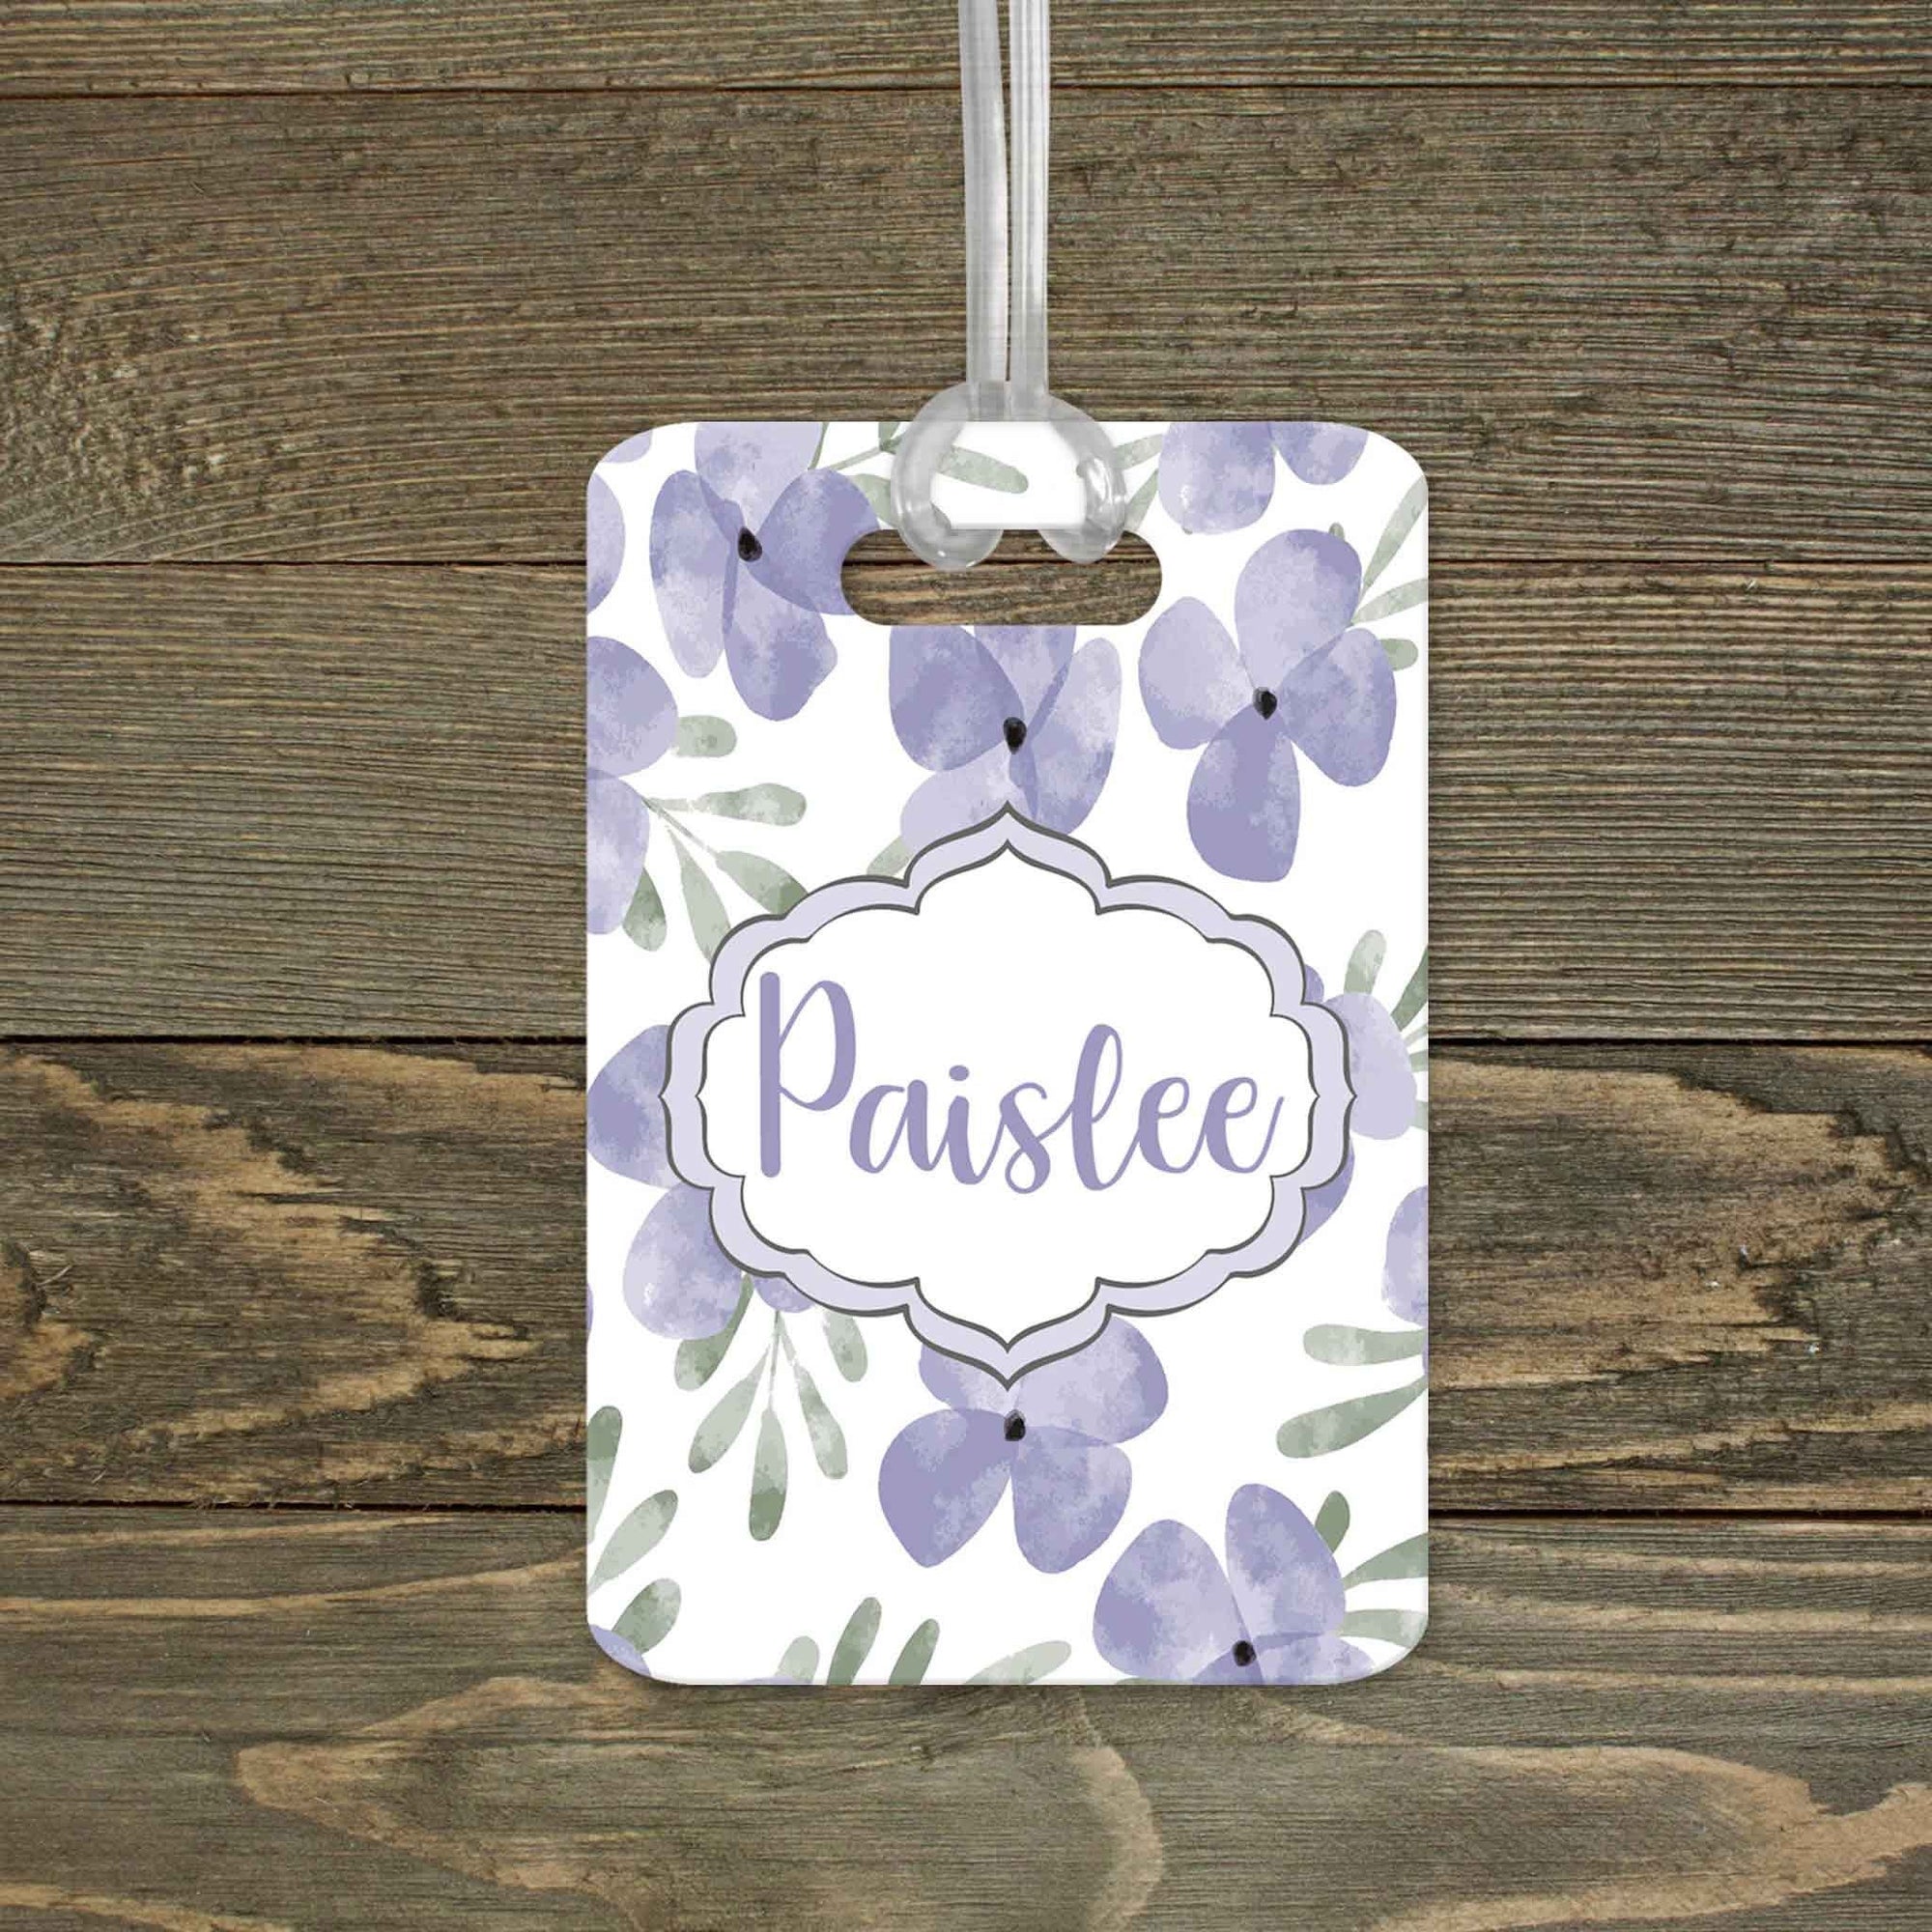 This & That Solutions - Personalized Luggage Tag | Custom Monogram Bag Tag | Periwinkle - Personalized Gifts & Custom Home Decor